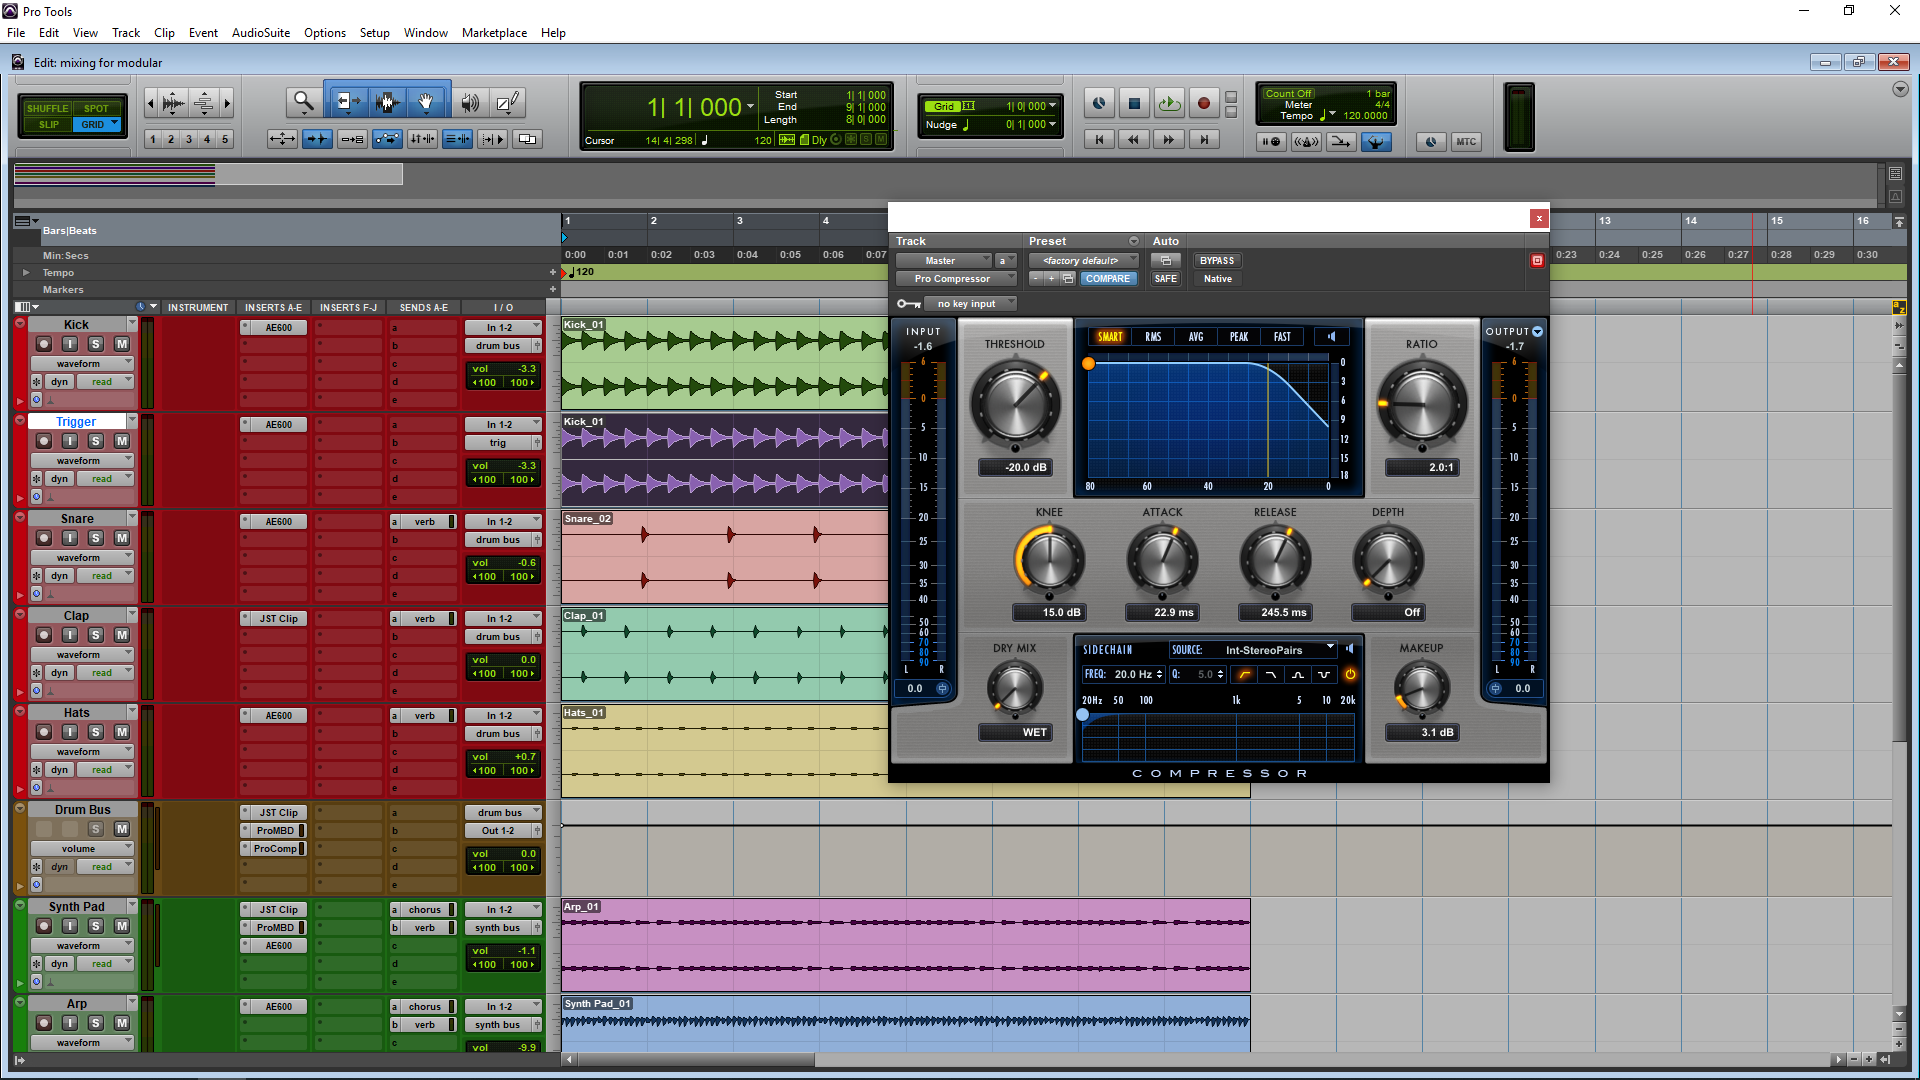 Image shows Pro Tools Mixing Screen